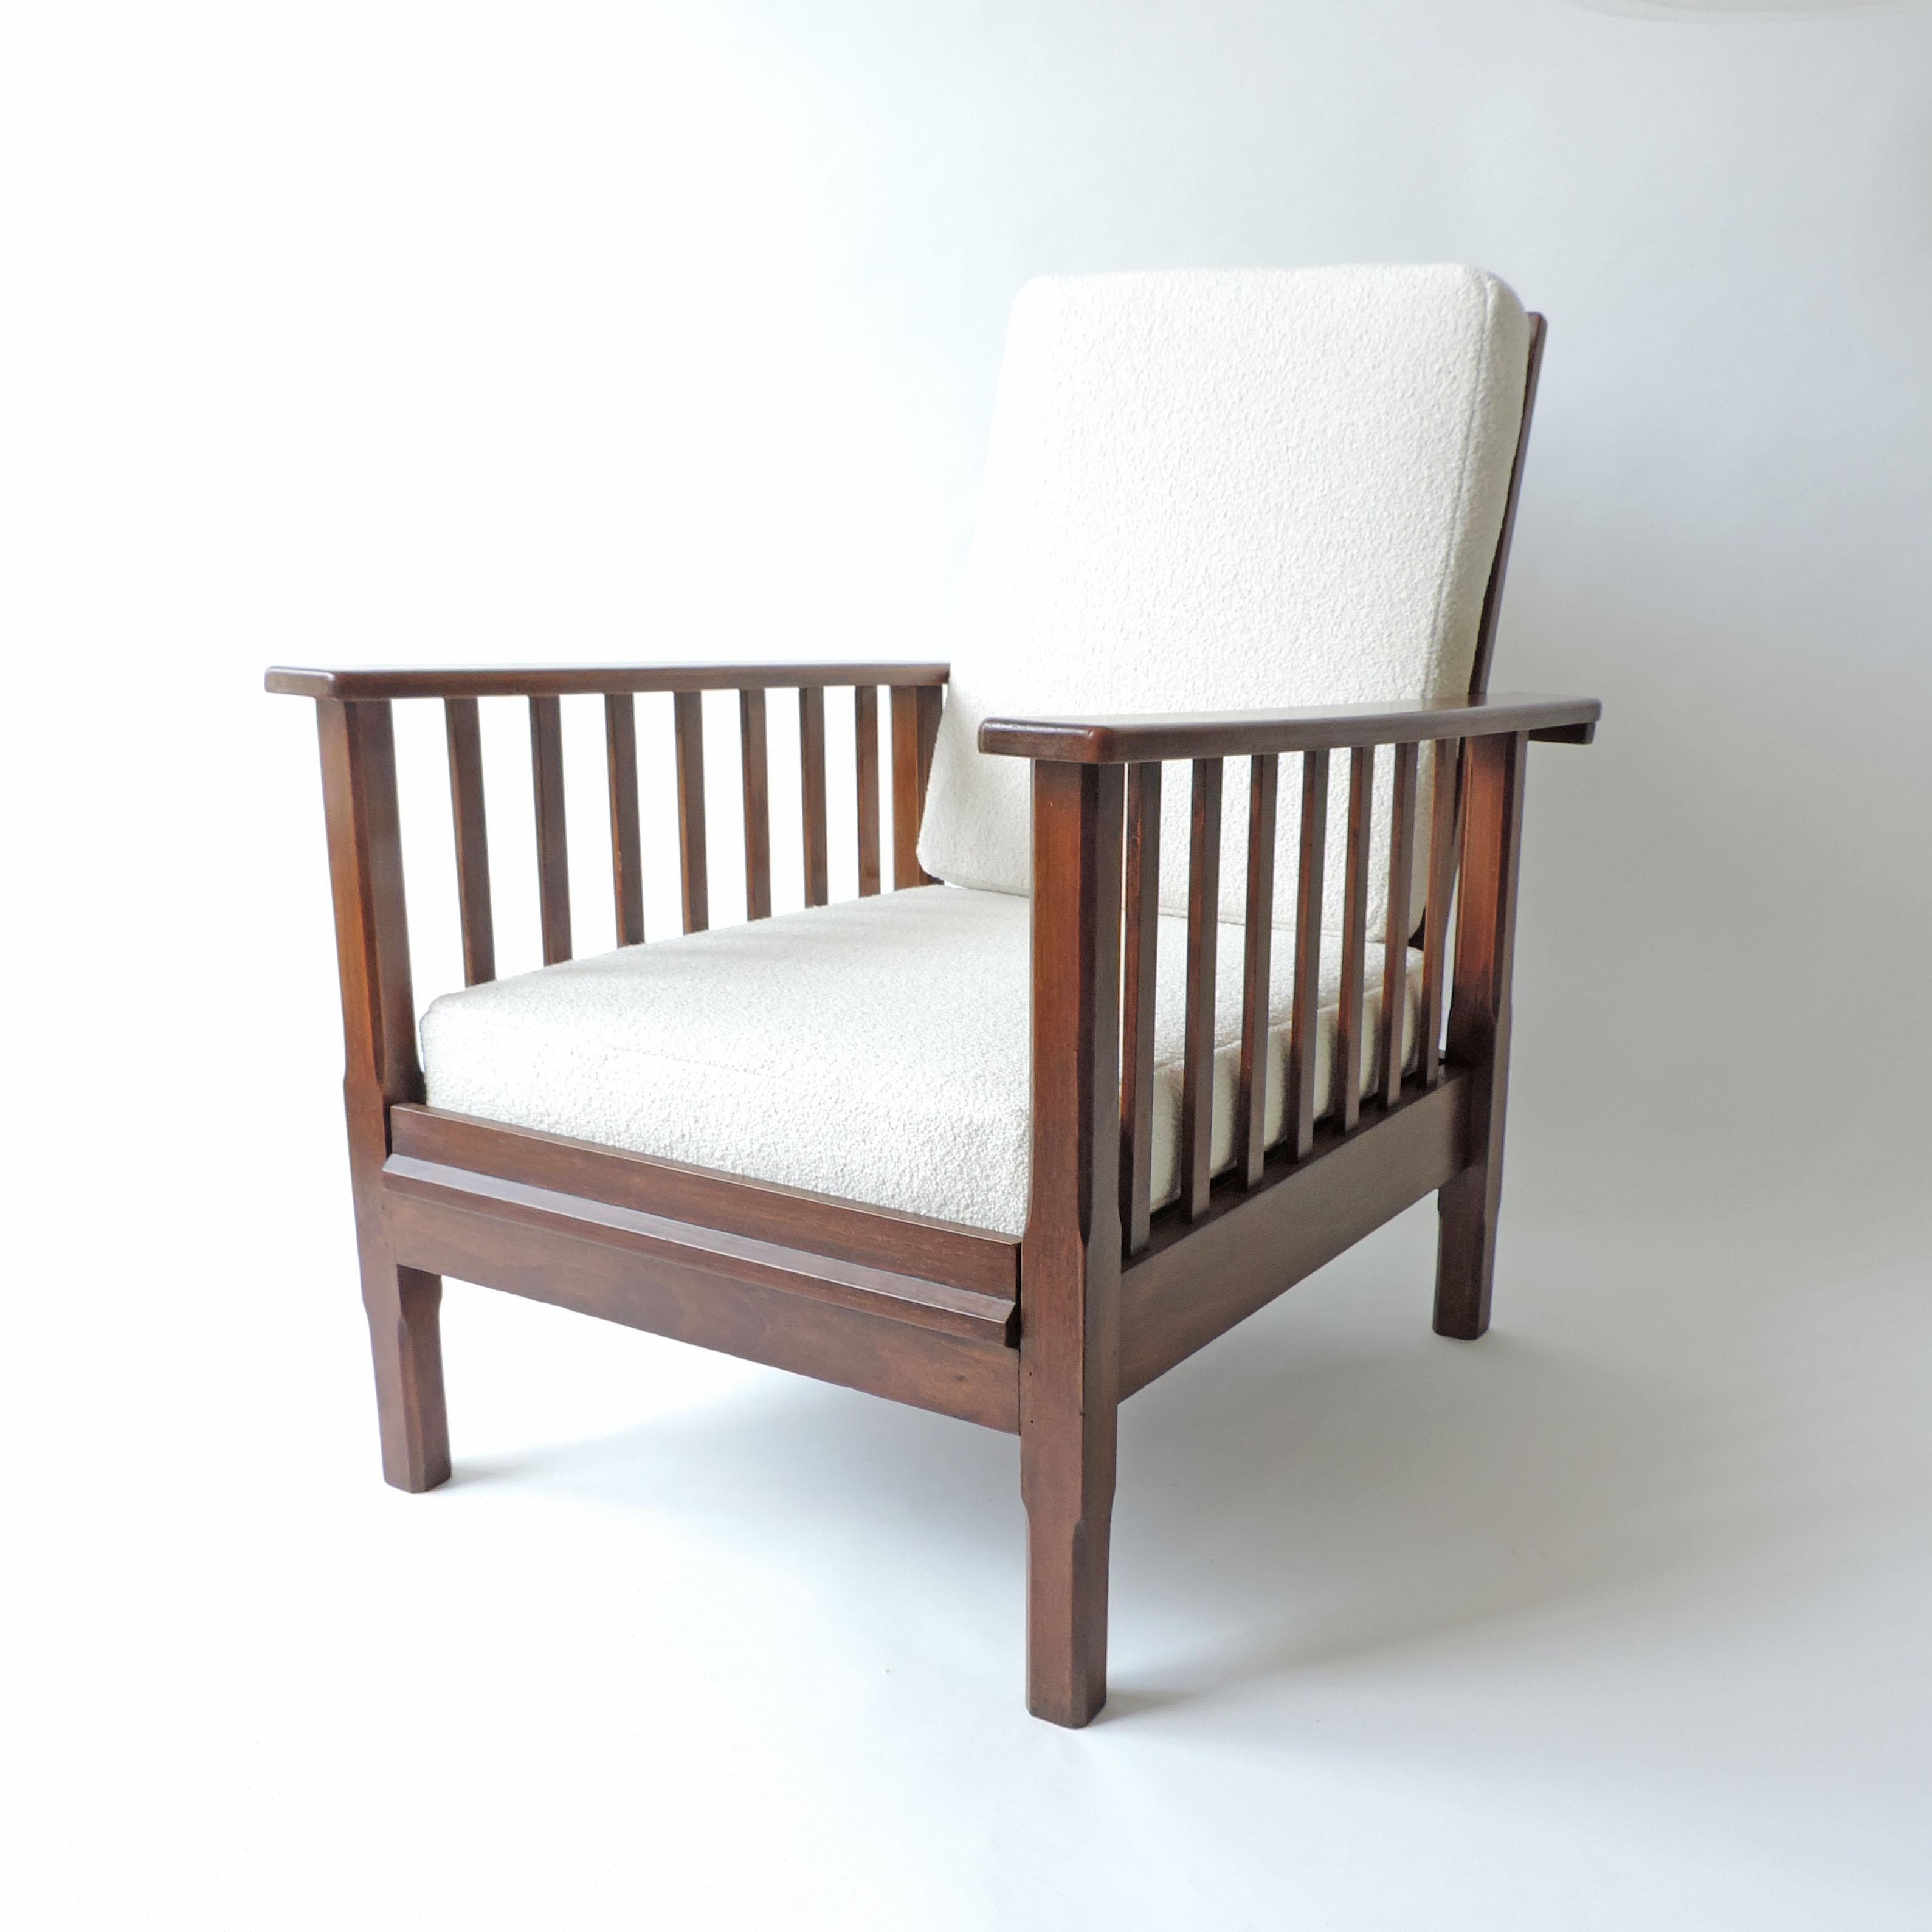 Bauhaus Italian Rationalist Adjustable Wooden Lounge Chair, Italy 1940s For Sale